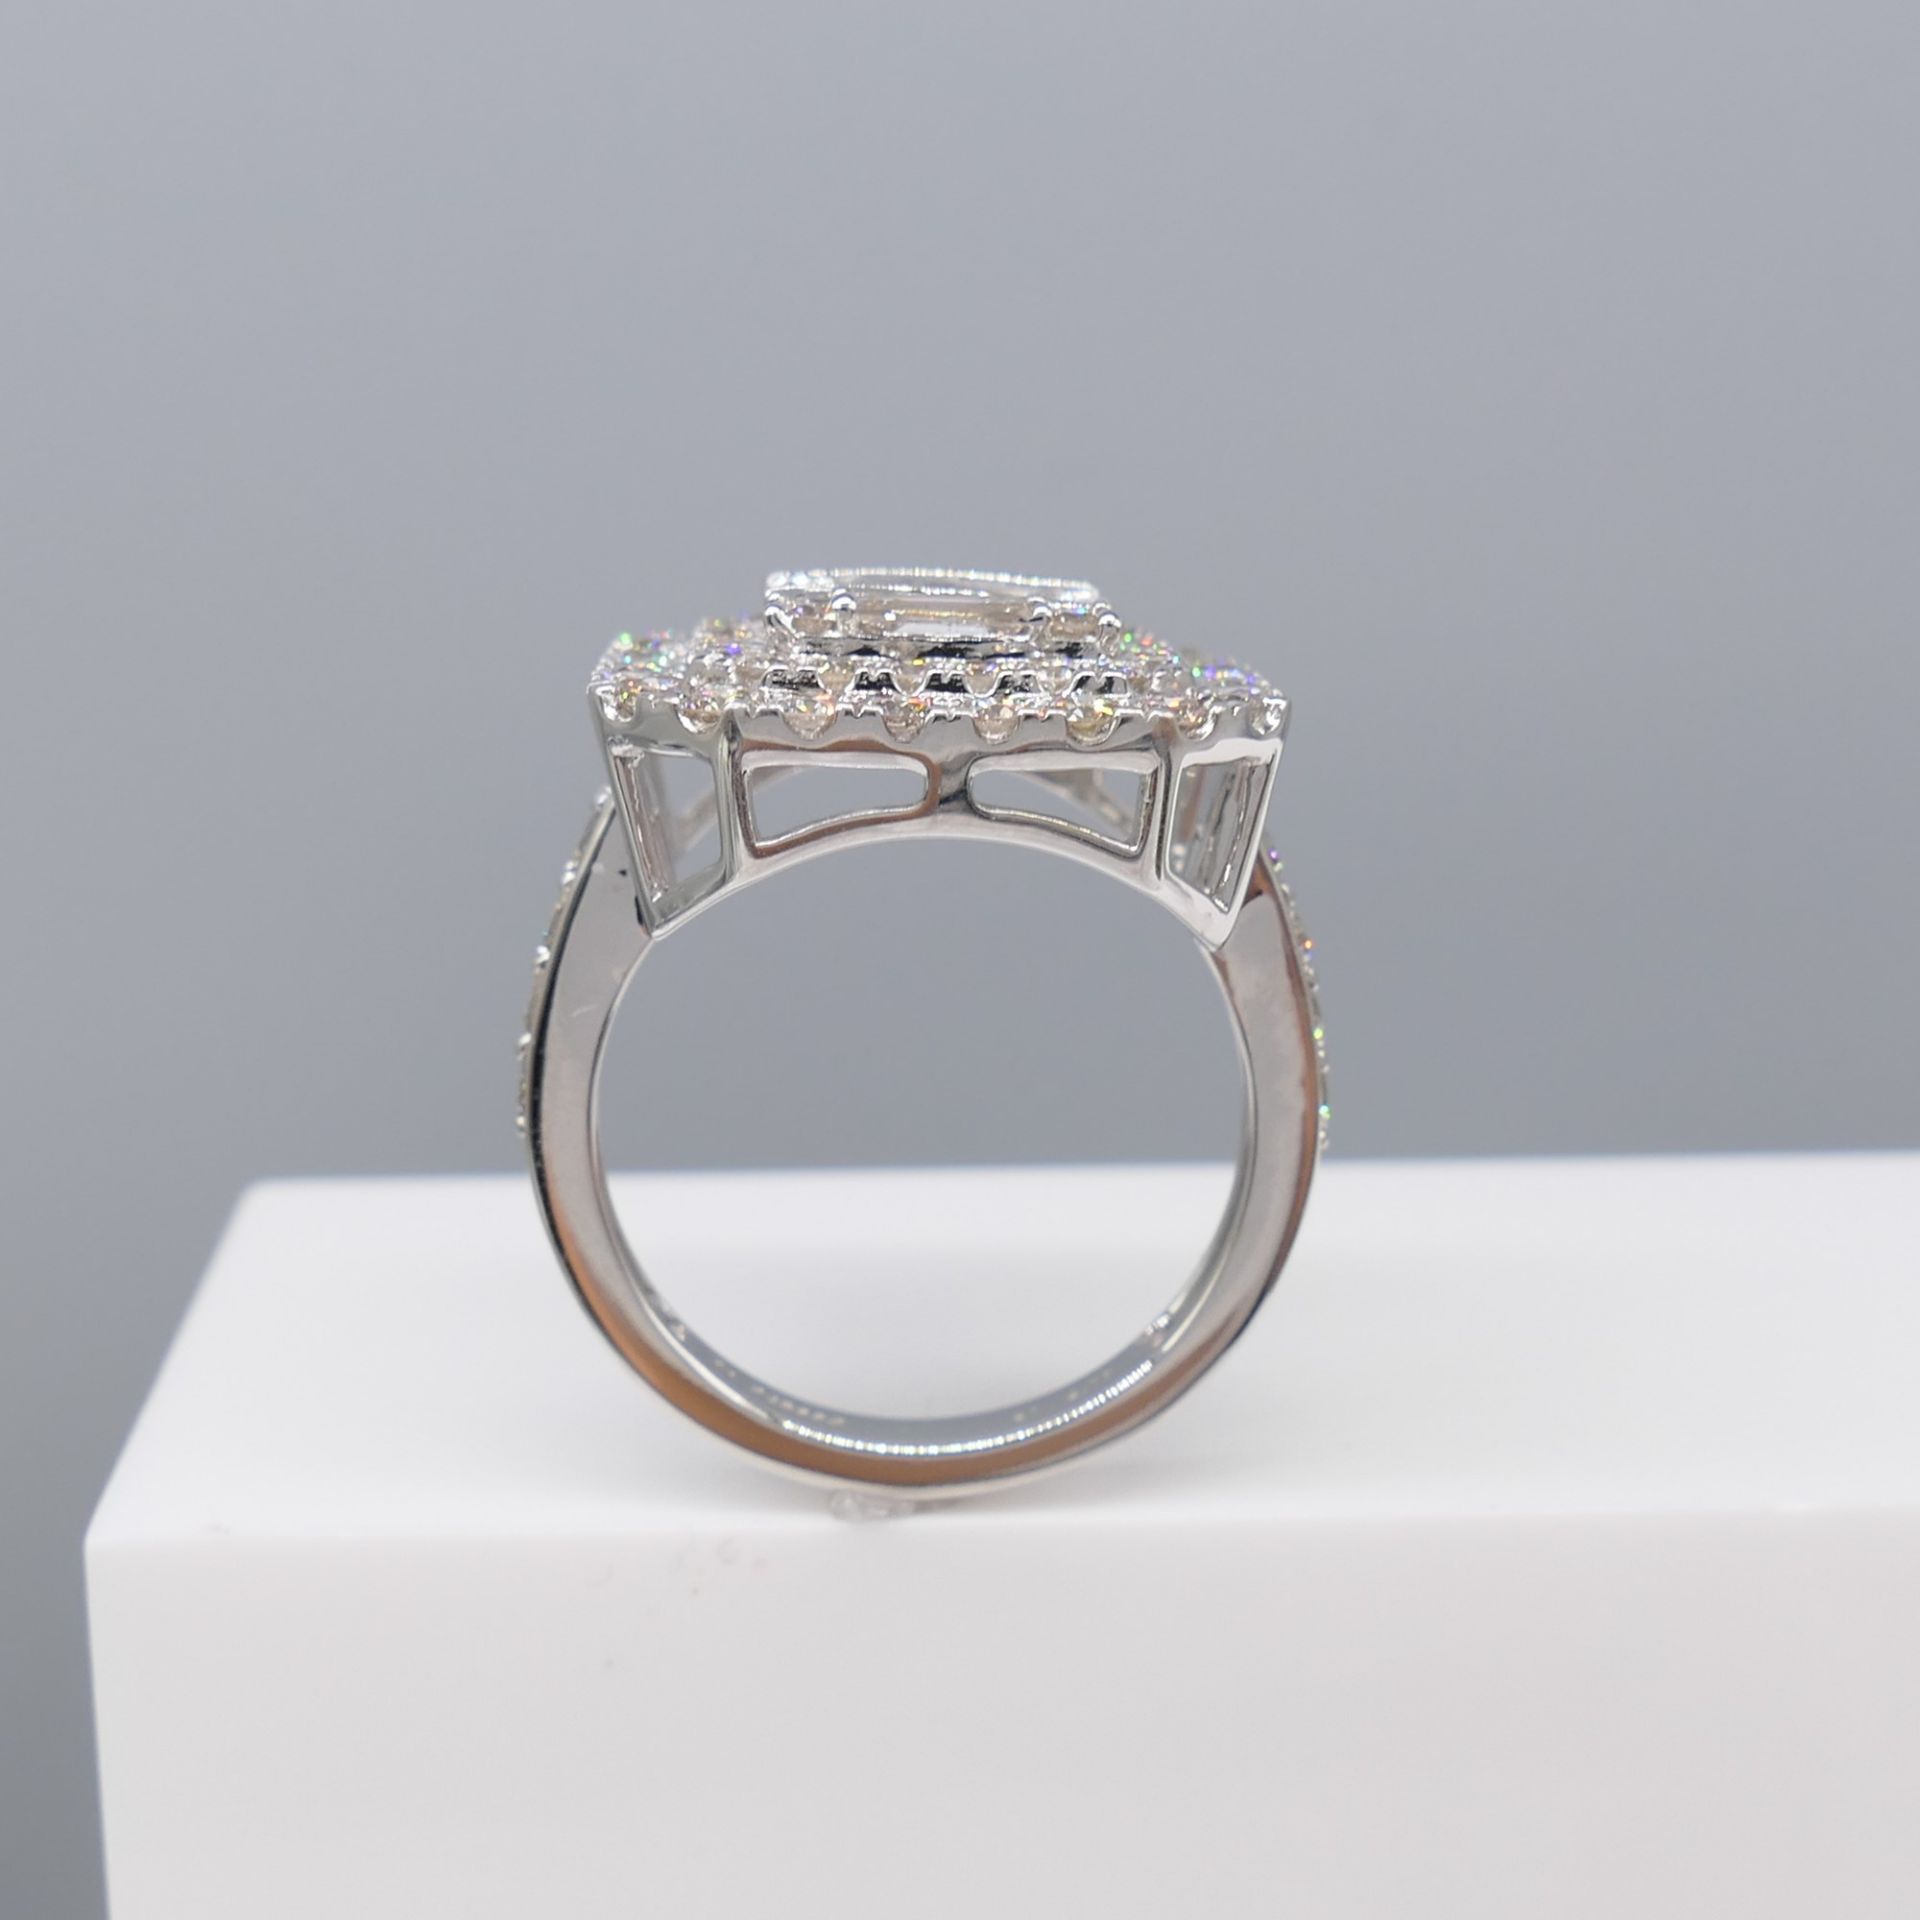 Large and Impressive White Gold 2.75 Carat Diamond Cocktail Ring - Image 8 of 8